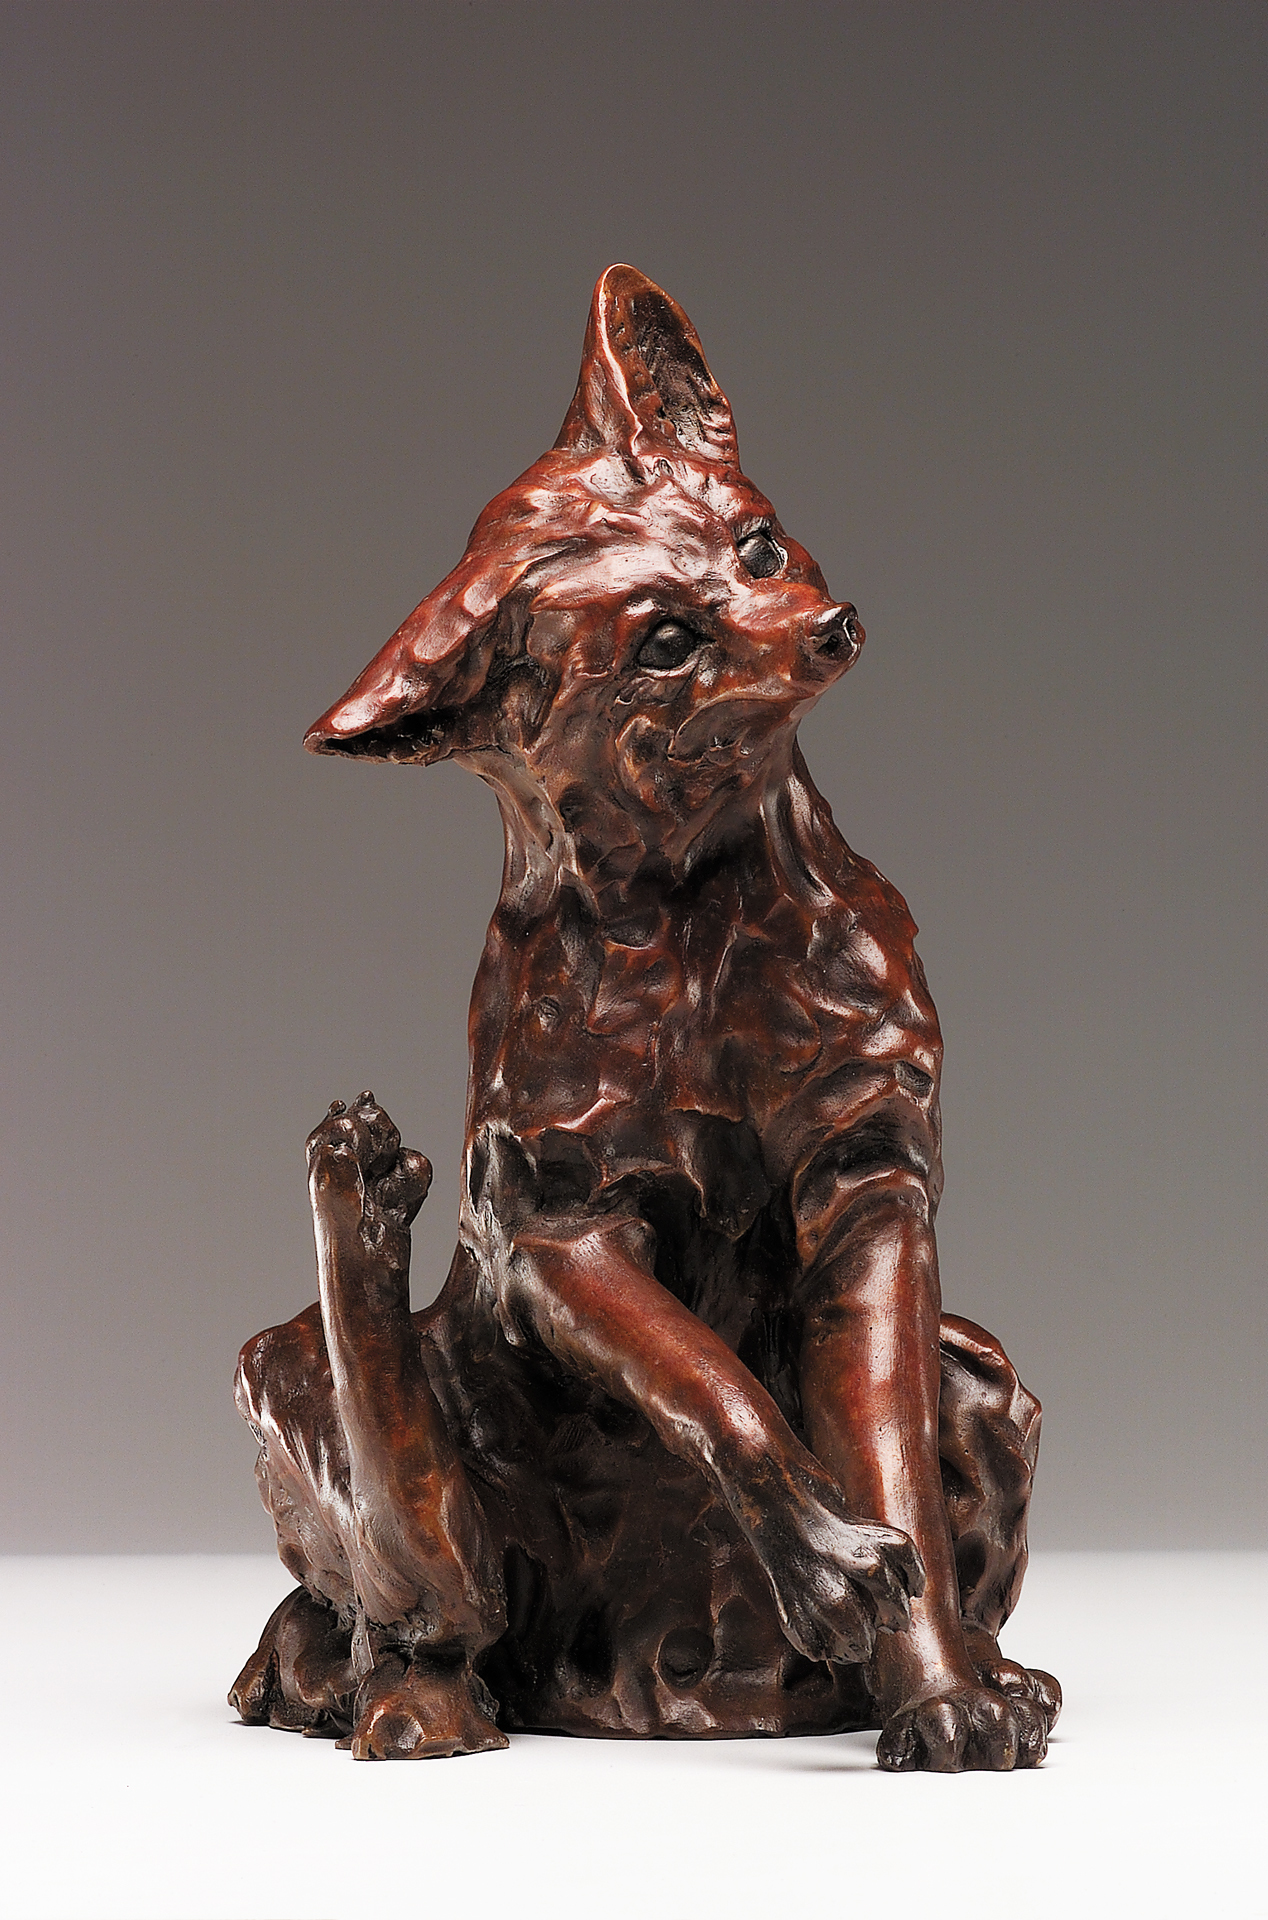 Bronze sculpture from Carrie Quade, Santa Fe, New Mexico